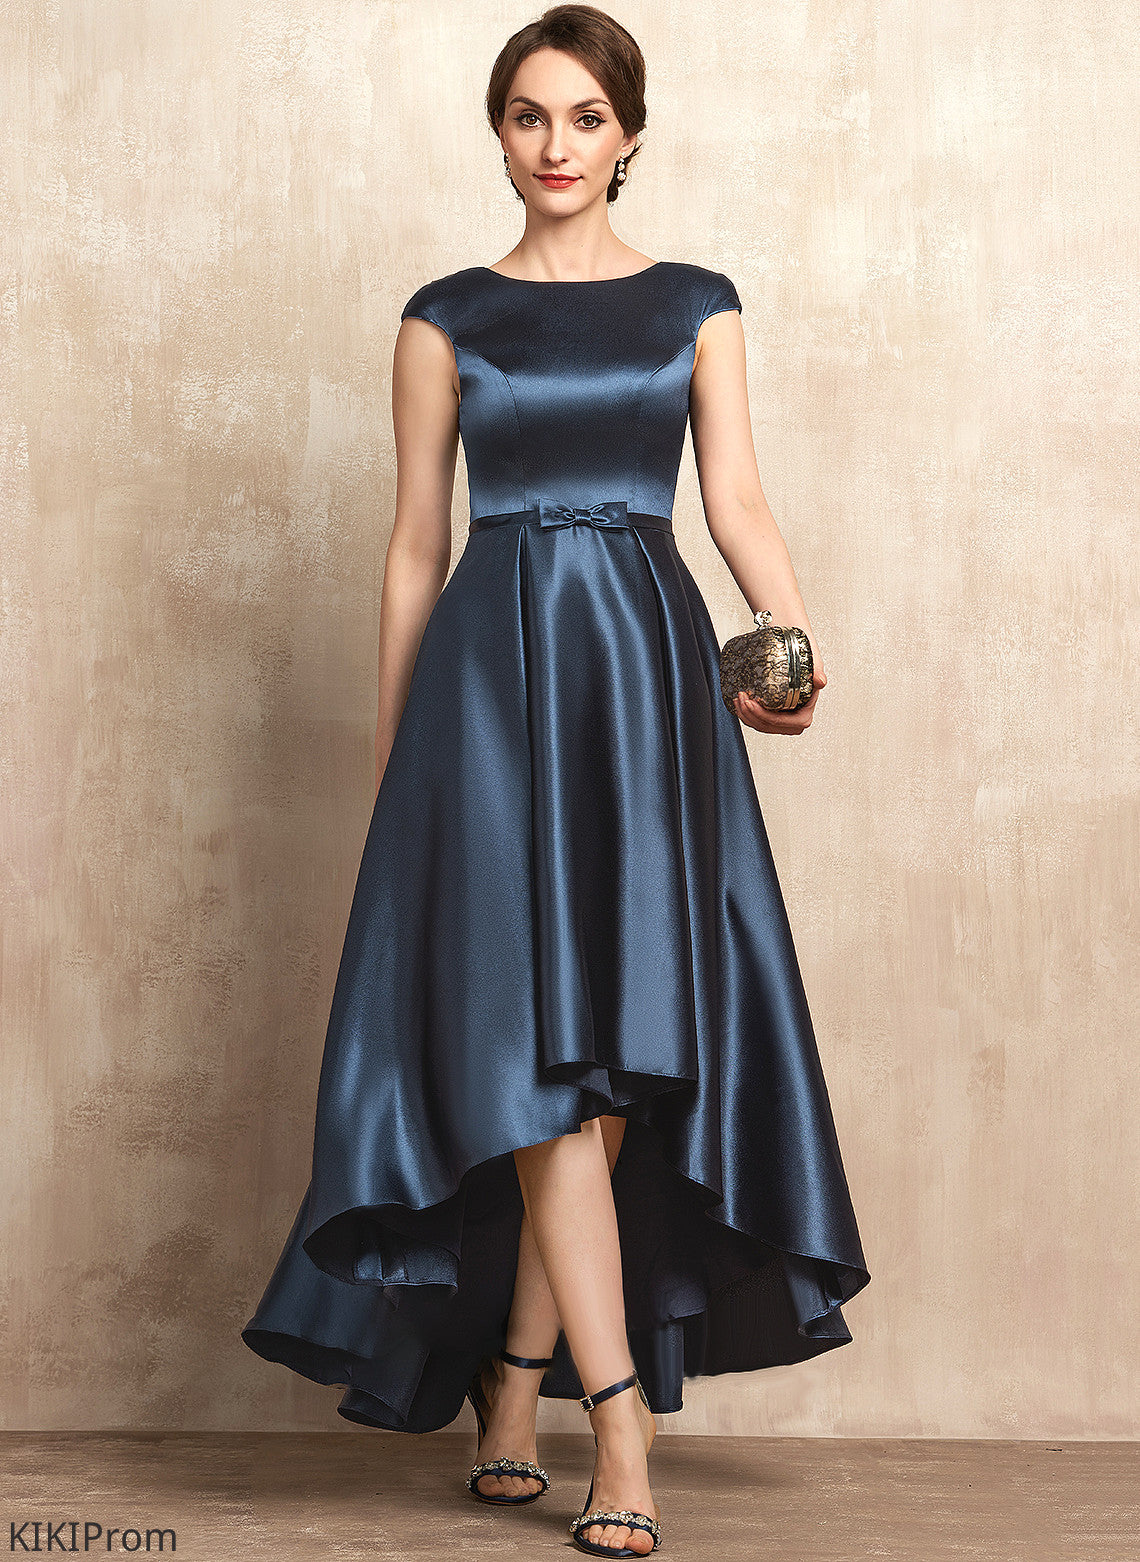 of Neck Bow(s) A-Line Asymmetrical the Dress Bride Satin Mother of the Bride Dresses Mother With Malia Pockets Scoop